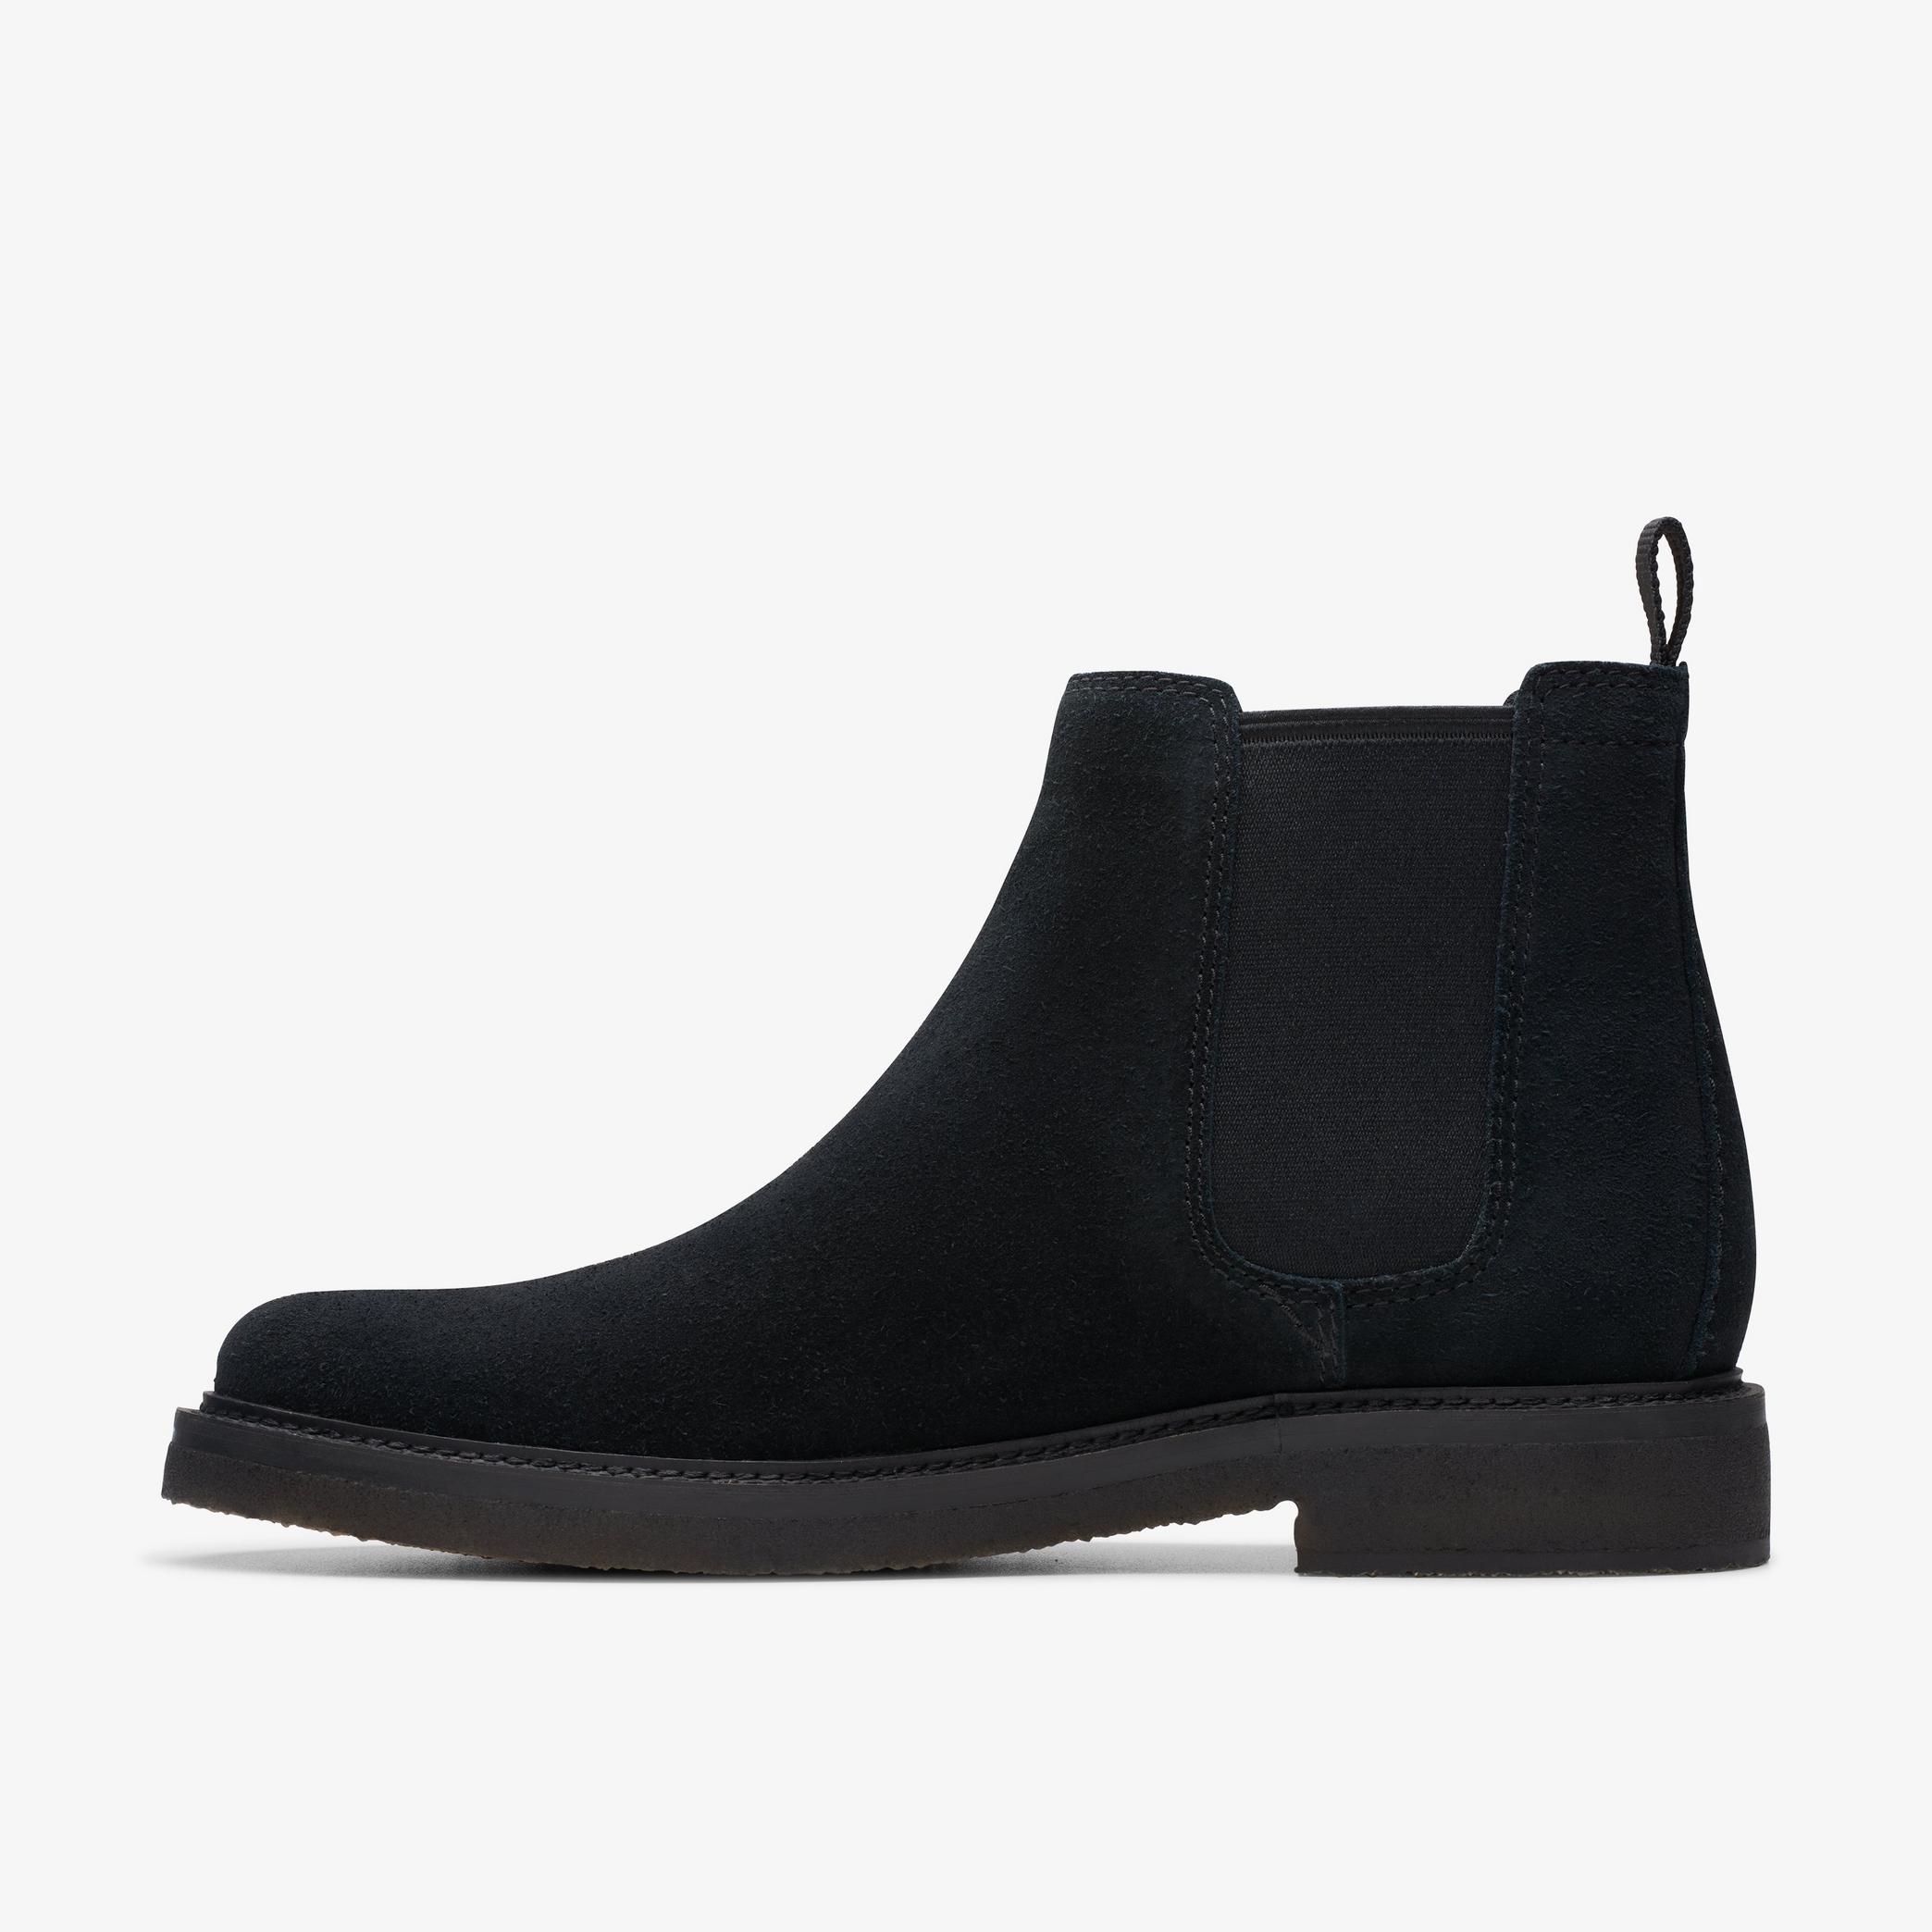 MENS Clarkdale Easy Black Suede Chelsea Boots | Clarks US